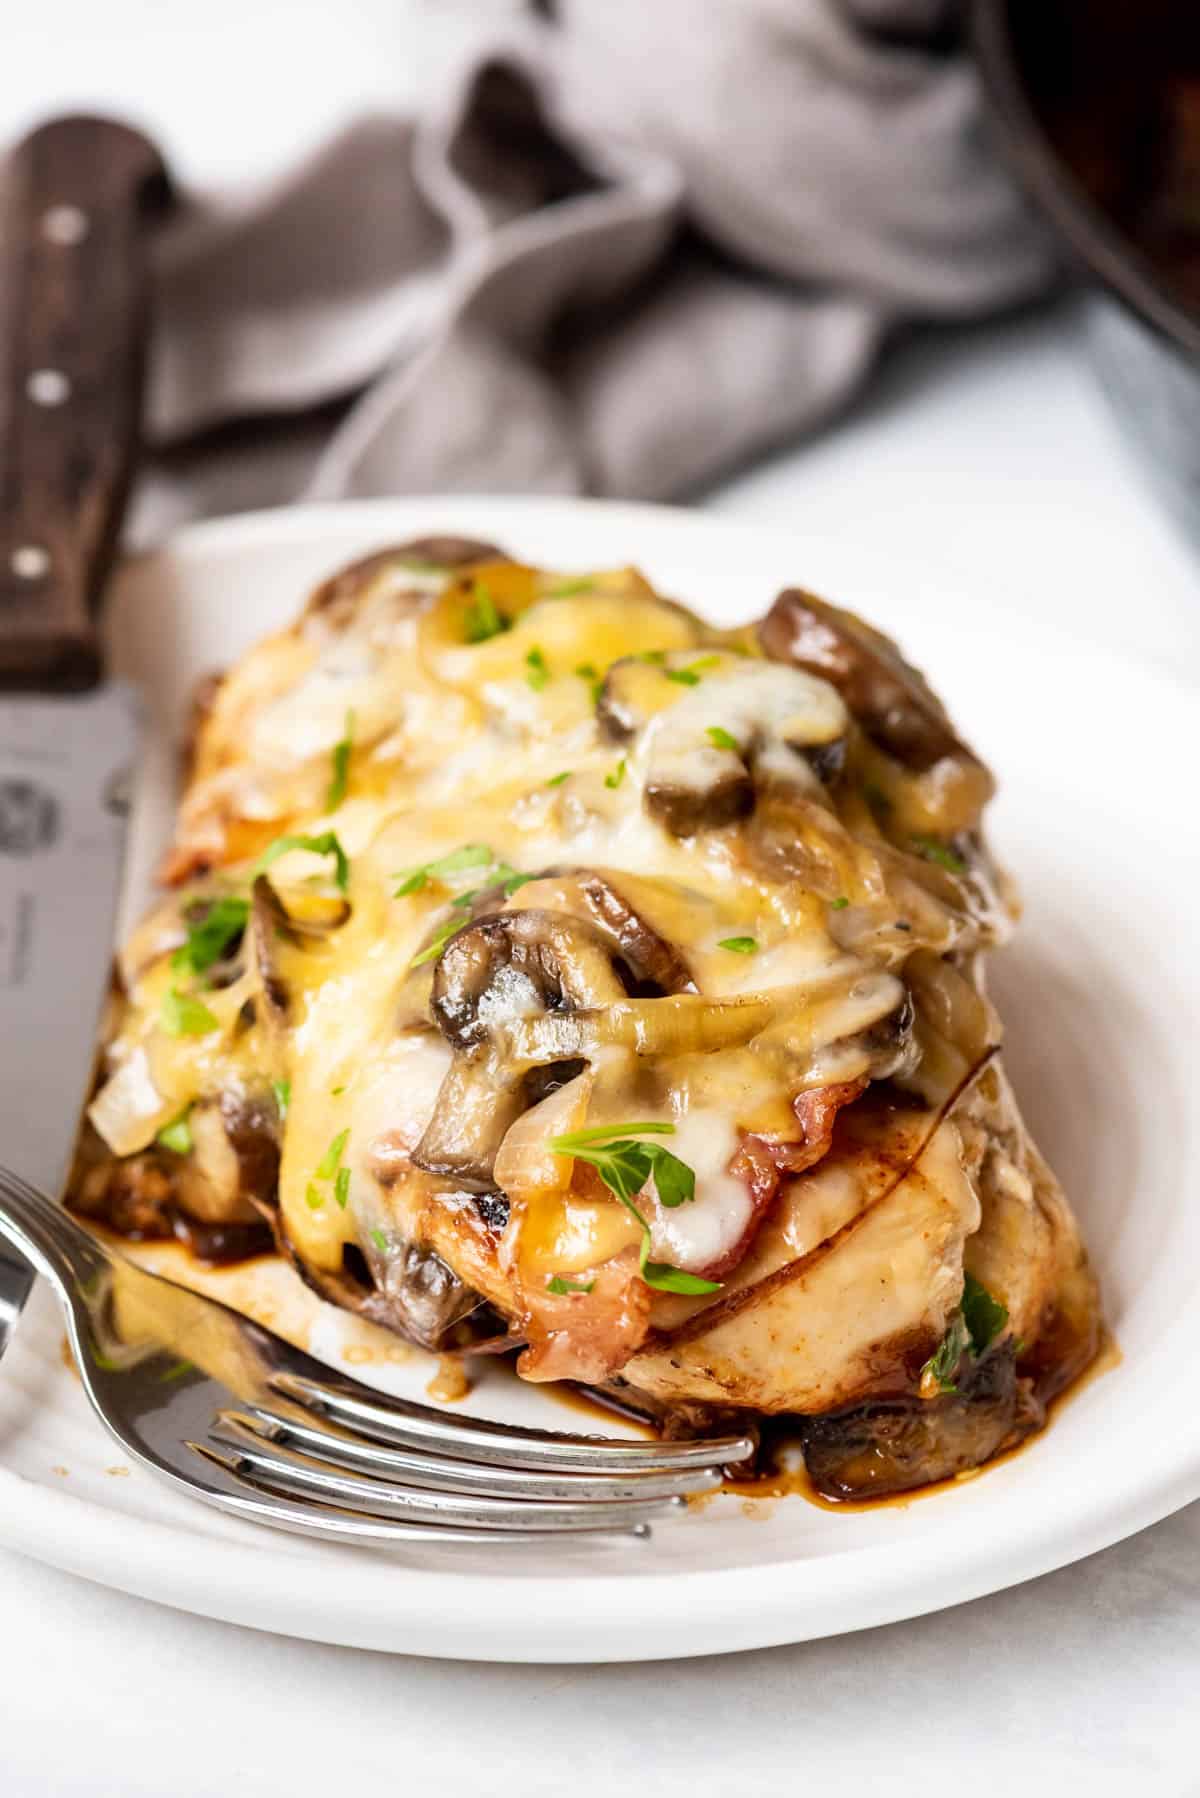 Melted cheese and sauteed onions on a piece of moist chicken.